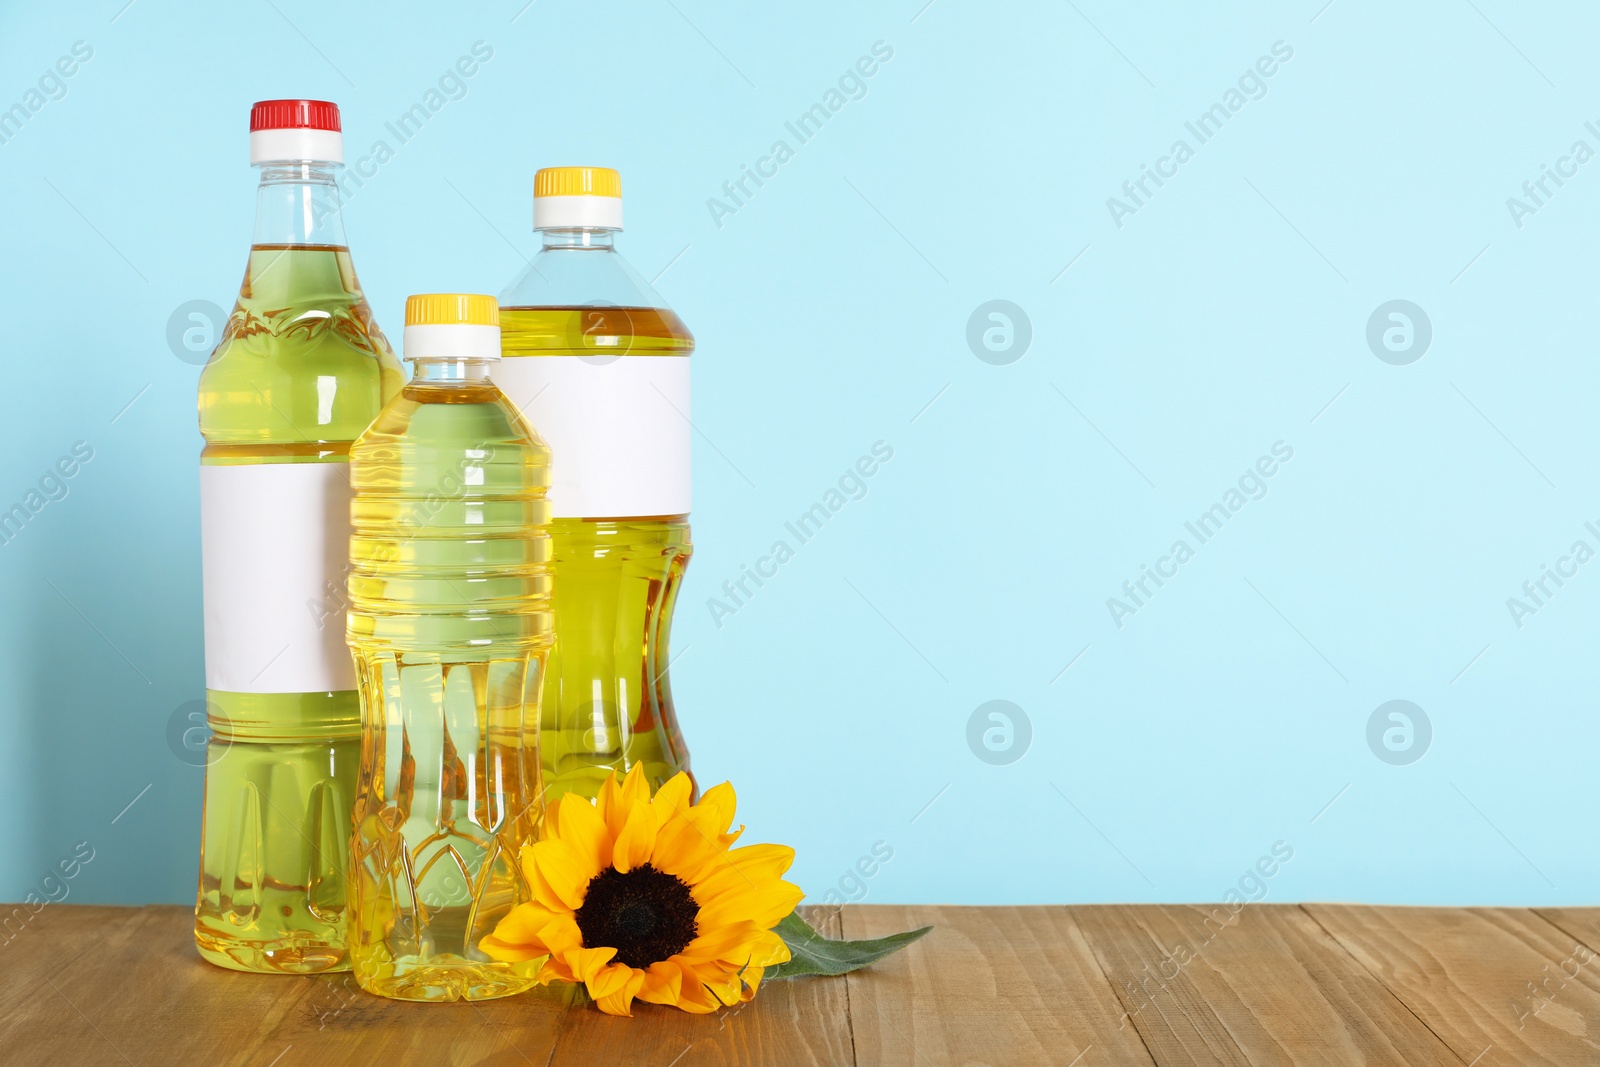 Photo of Bottles of cooking oil and sunflower on wooden table, space for text